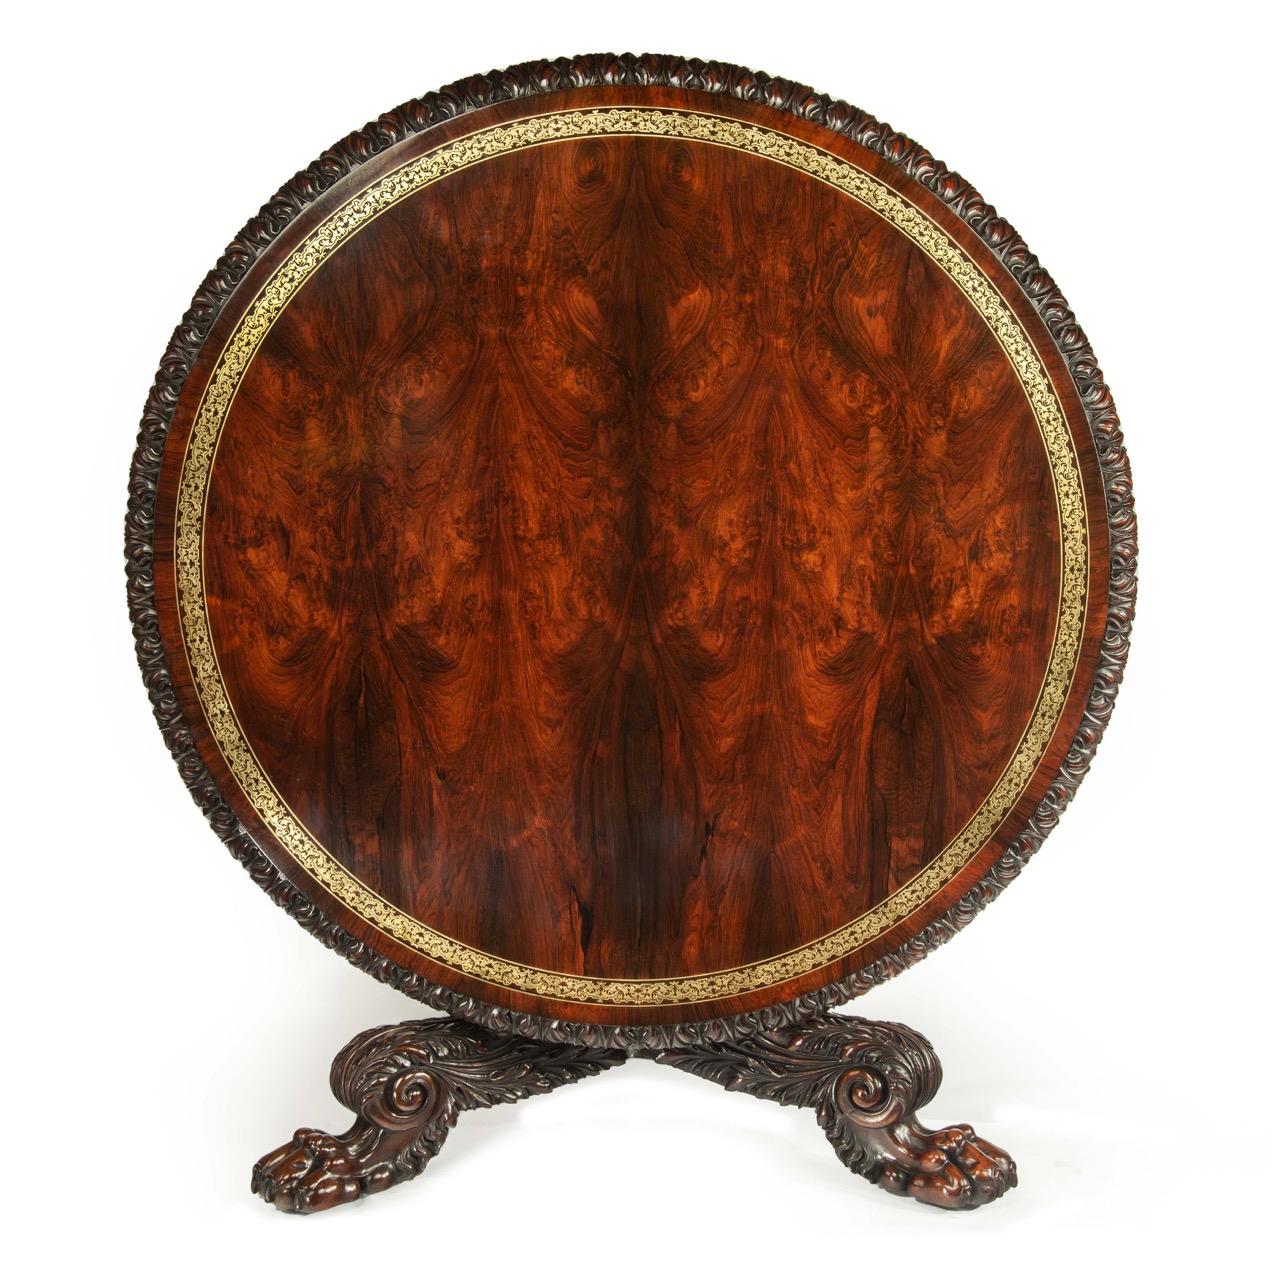 The circular tilt top has a central field of book-matched, figured rosewood within a broad band of cut brass inlay.  The edge is boldly carved with an acanthus and dart border.  The central support is hexagonal in section with a broad central